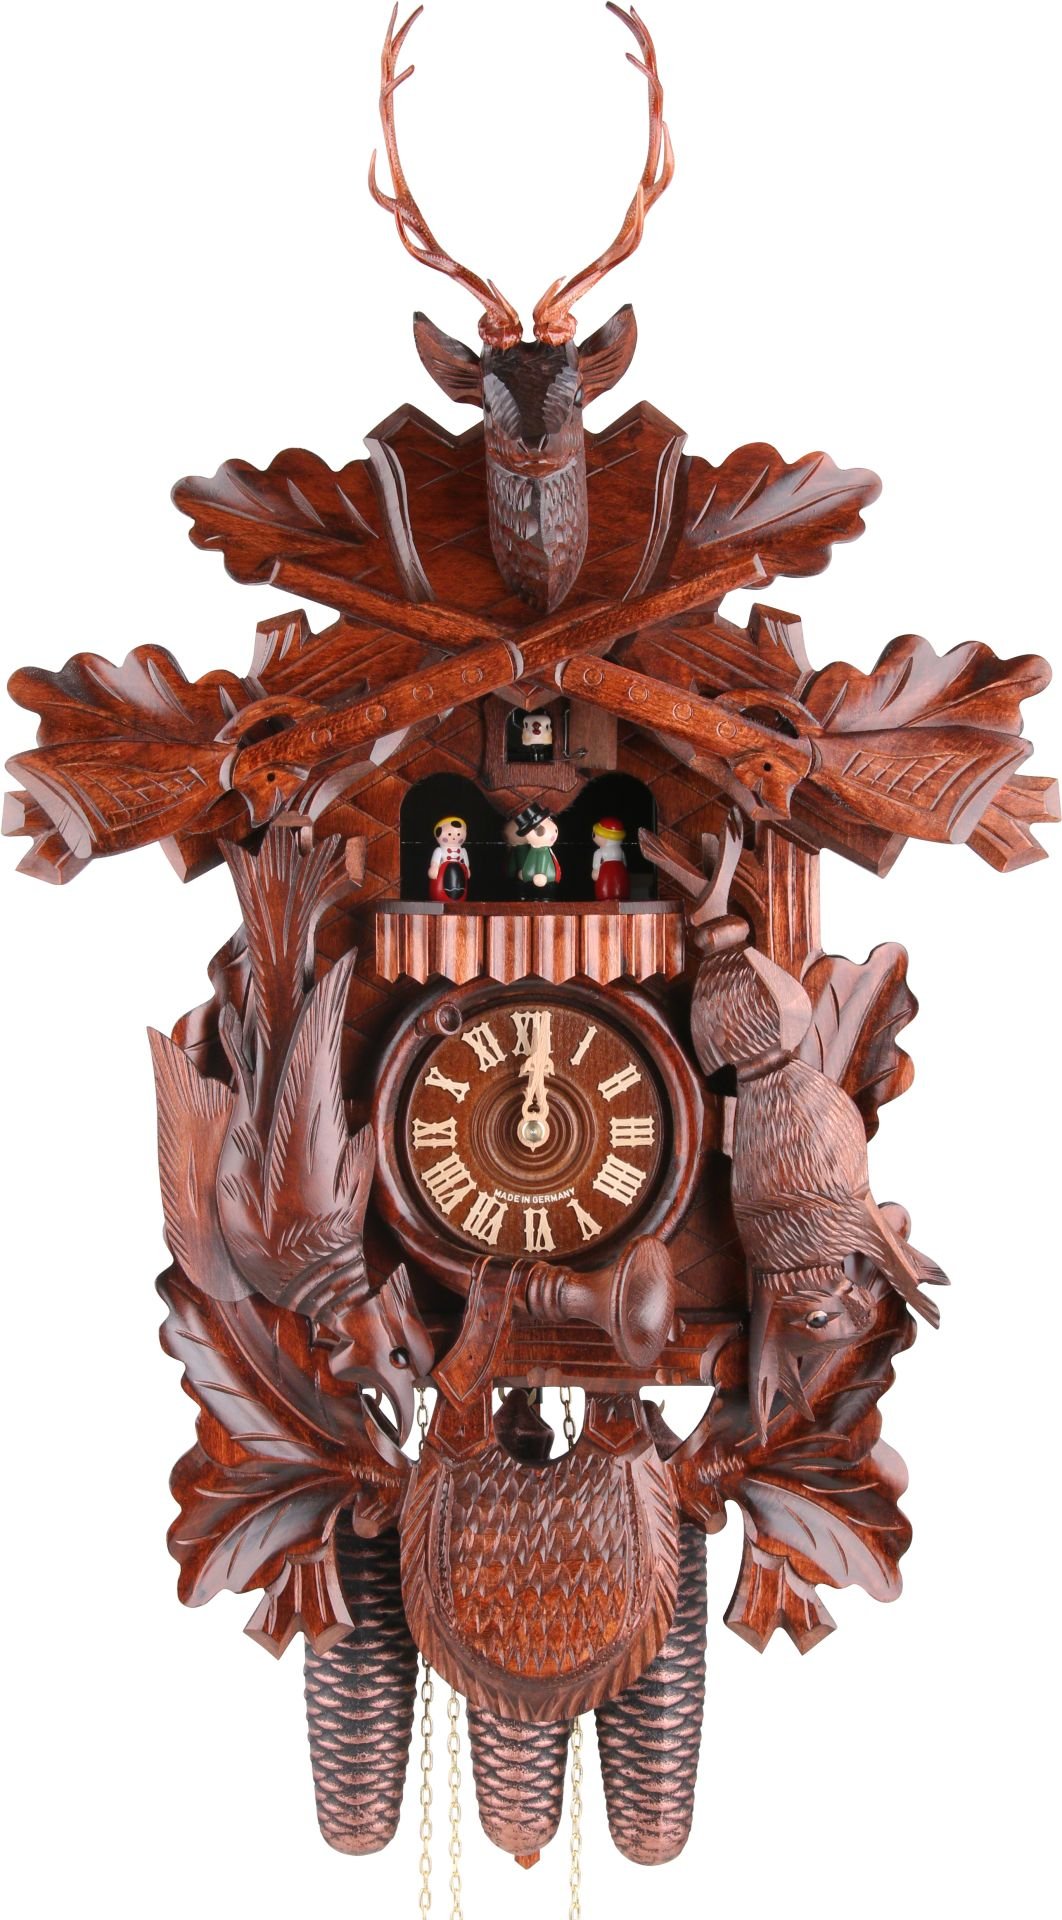 Cuckoo Clock Carved Style 8 Day Movement 58cm by Hekas